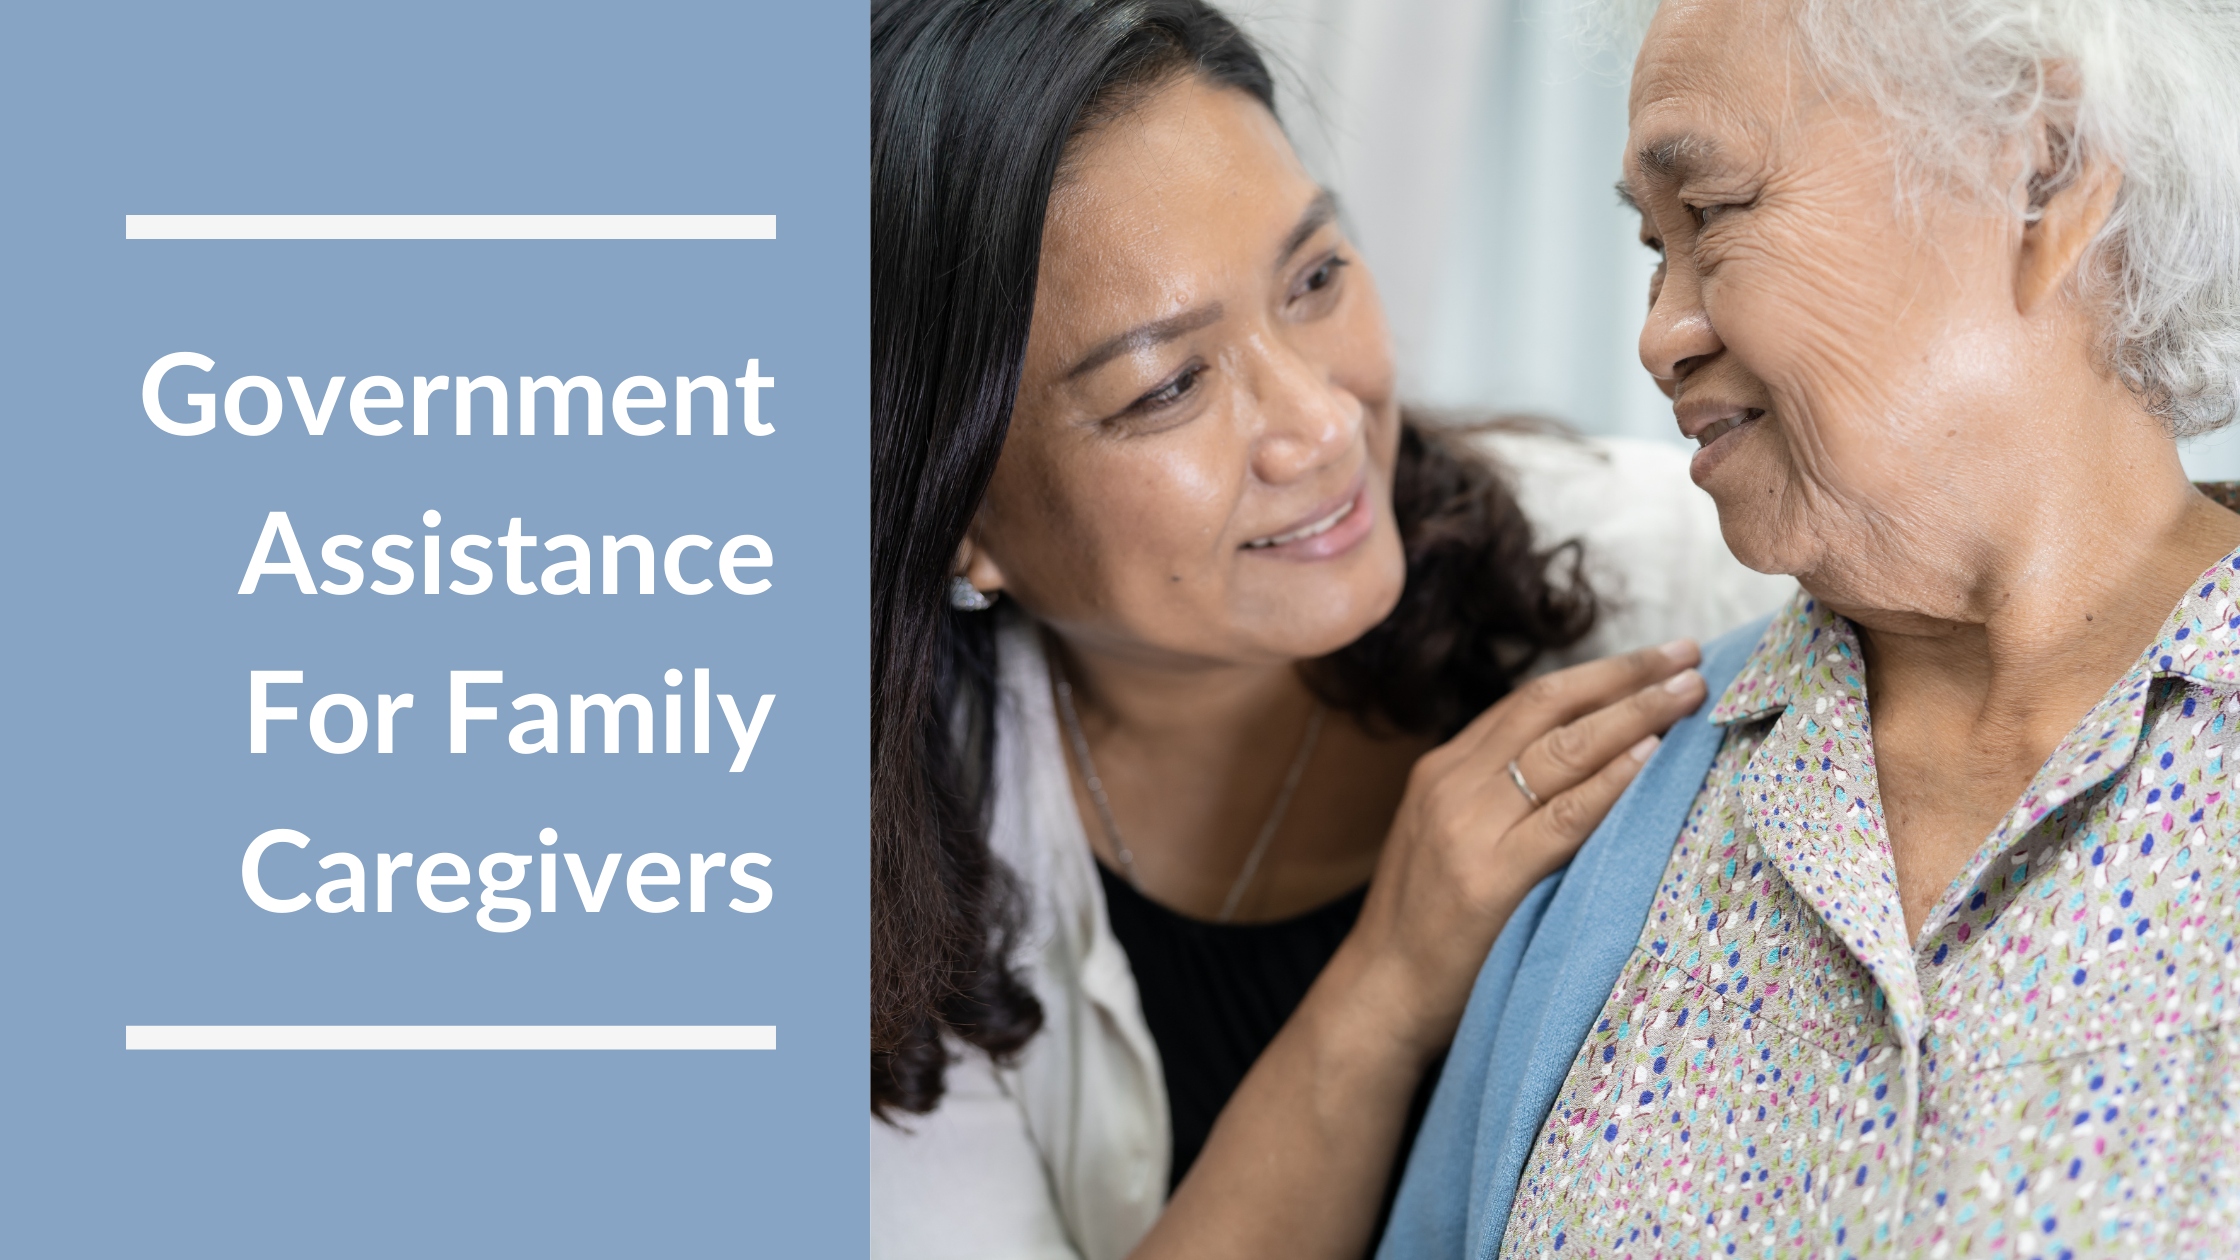 Government Assistance For Family Caregivers Featured Image